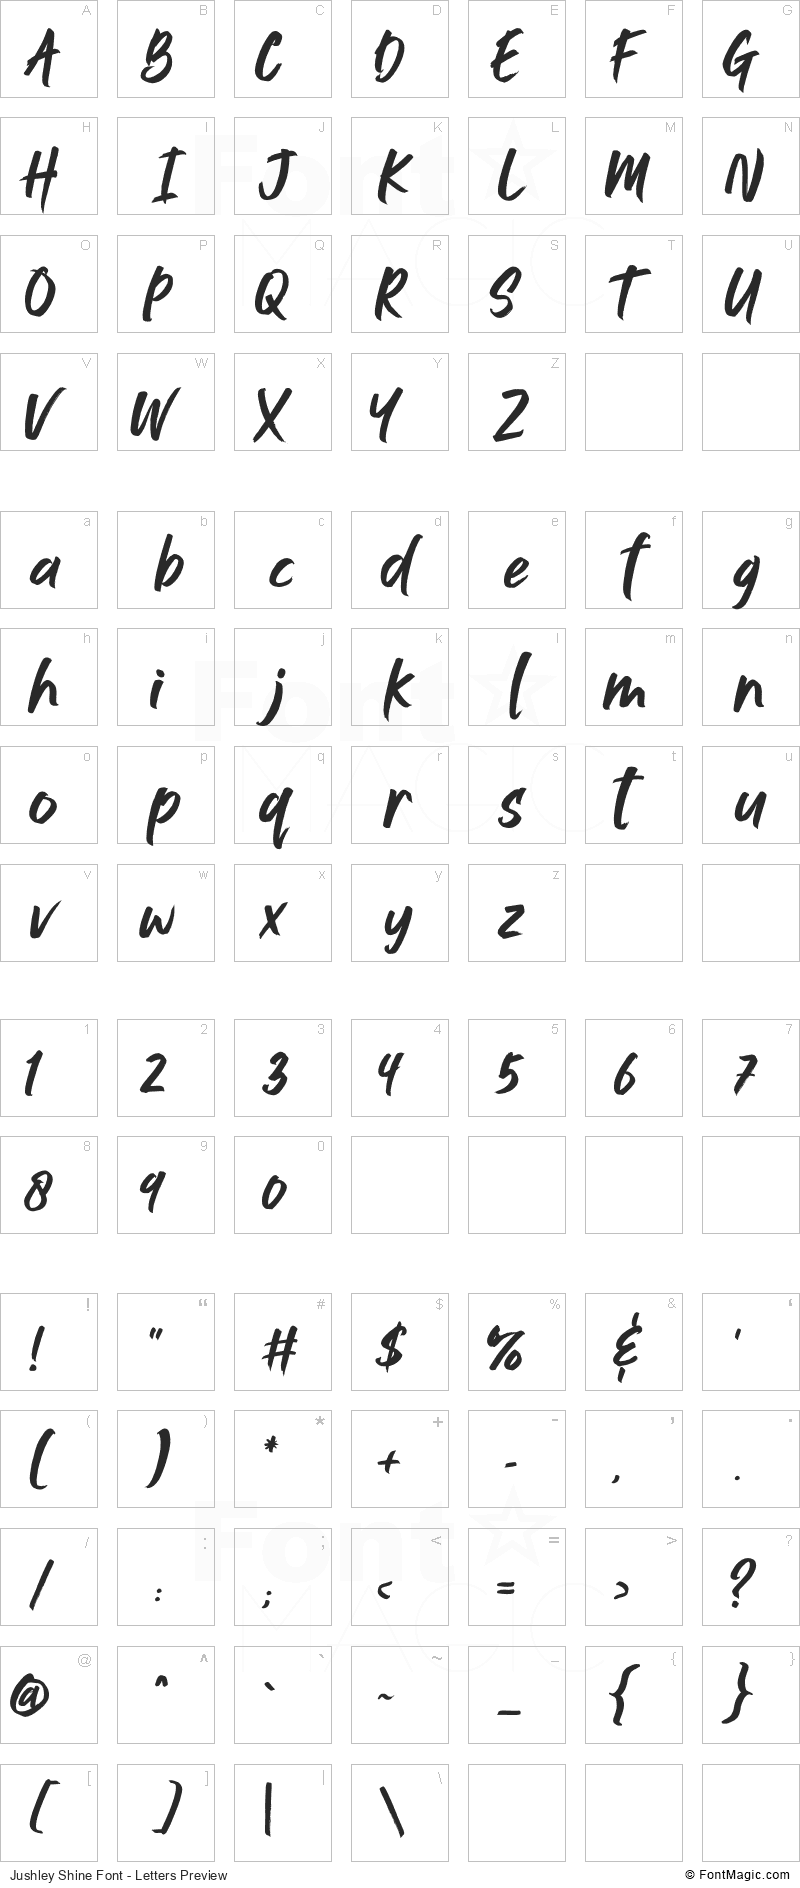 Jushley Shine Font - All Latters Preview Chart